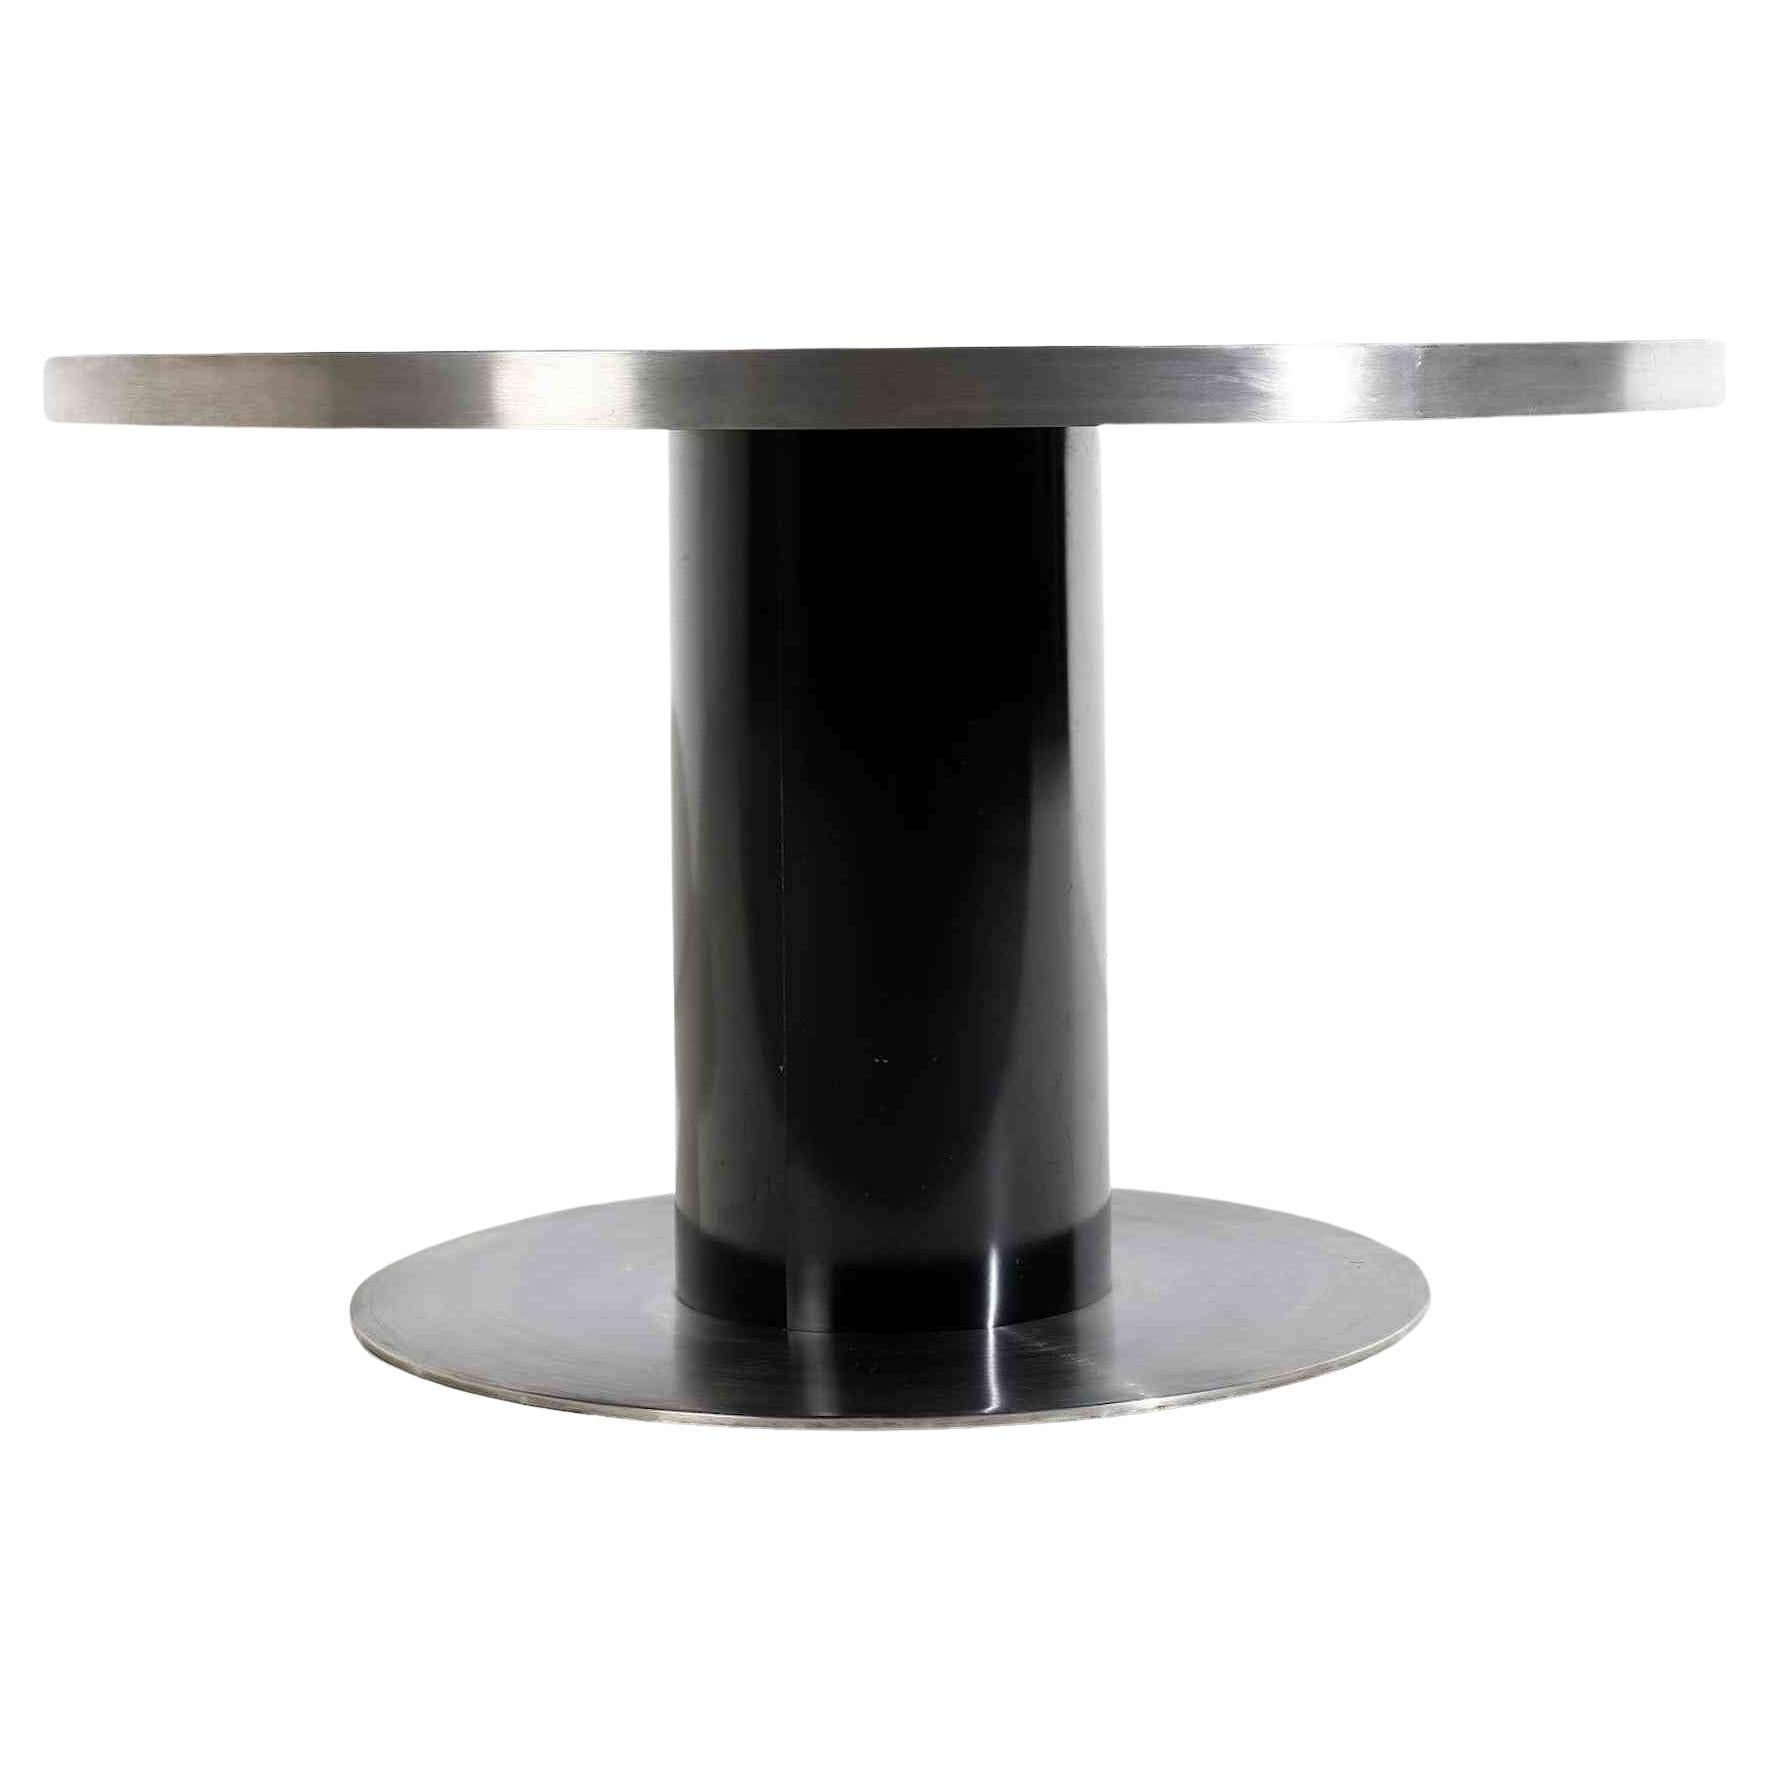 Vintage Table by Willy Rizzo fro Atelier Willy Rizzo, 1970s For Sale